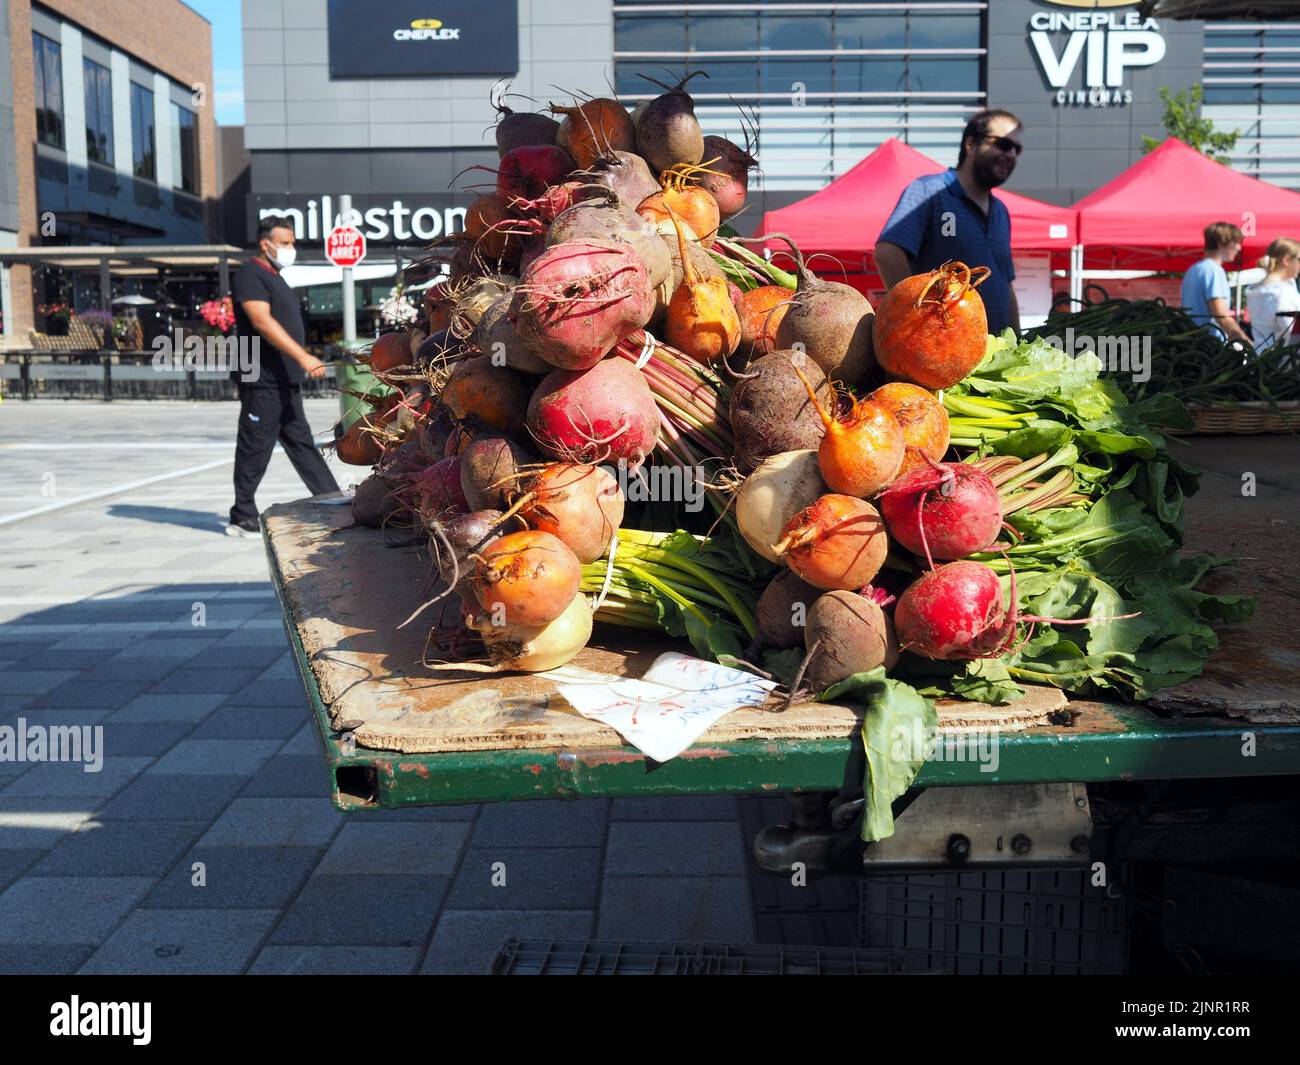 Scenes from the Farmer's Market at Lansdowne Place. Multi-colored beets on a trestle table. Ottawa, ON, Canada. Stock Photo